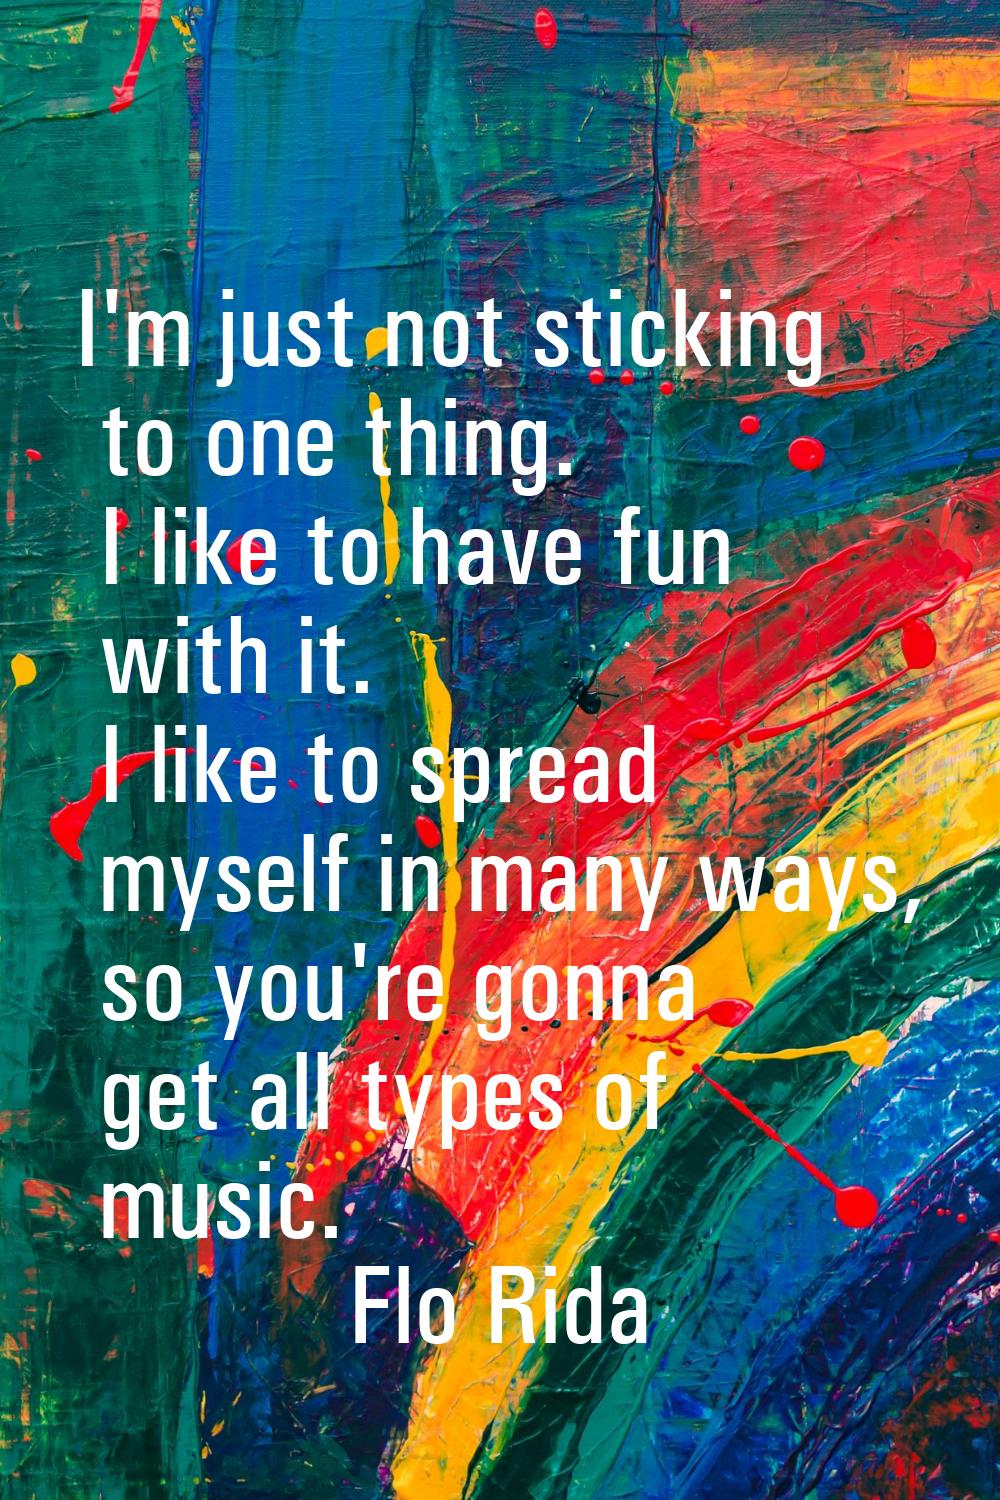 I'm just not sticking to one thing. I like to have fun with it. I like to spread myself in many way